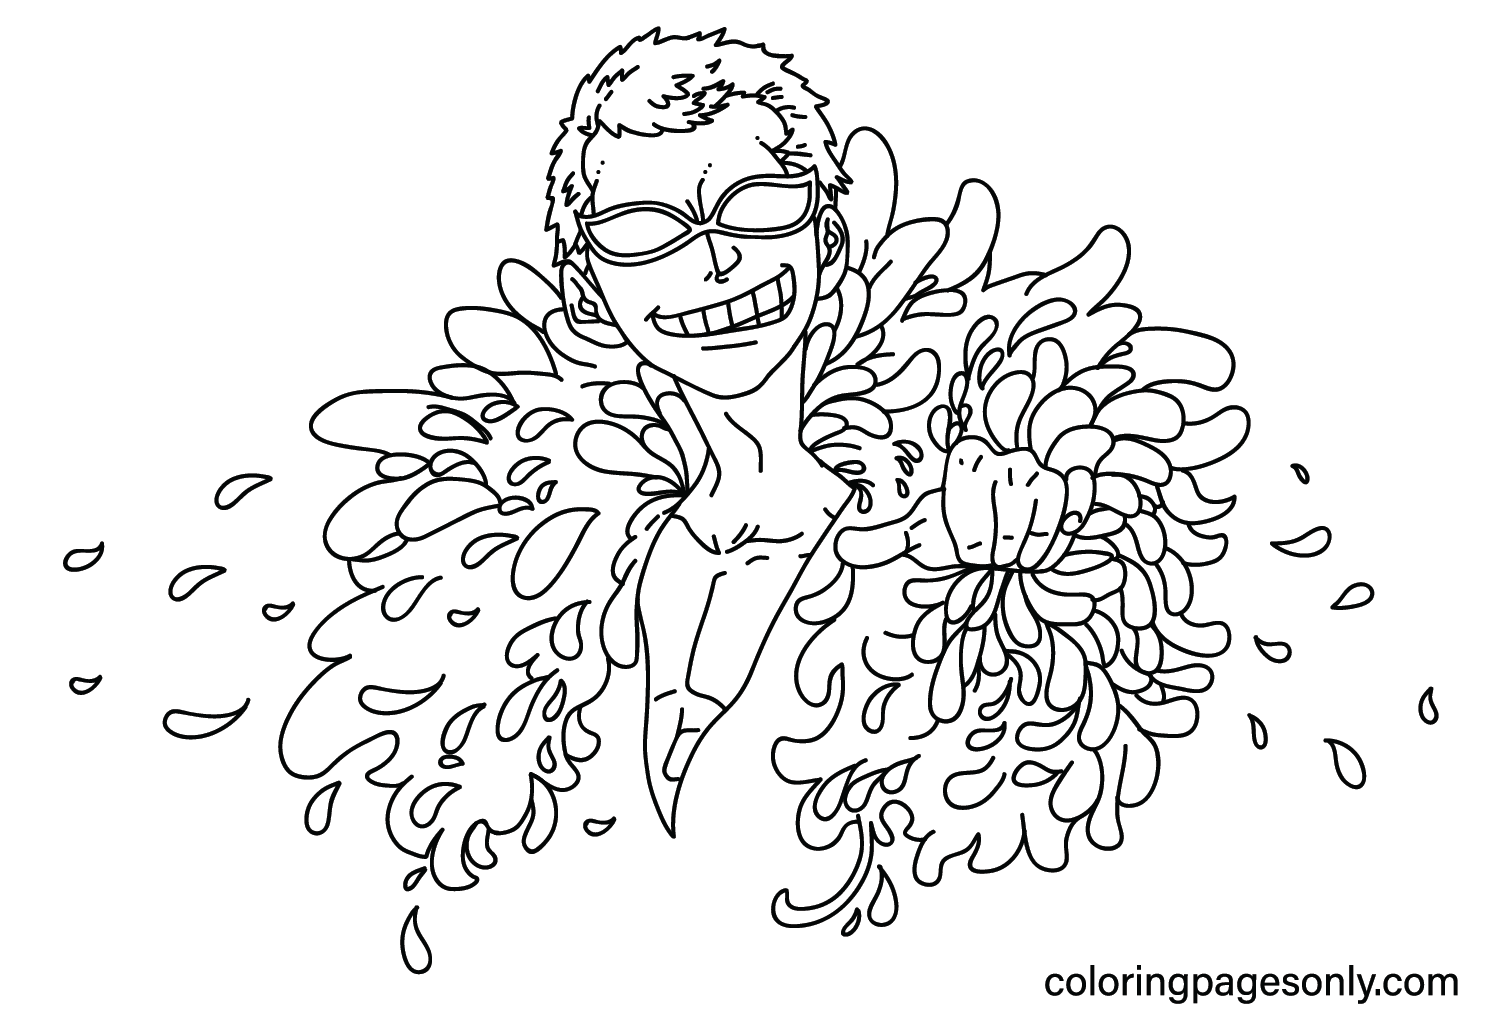 Donquixote Doflamingo Coloring Page for Adults